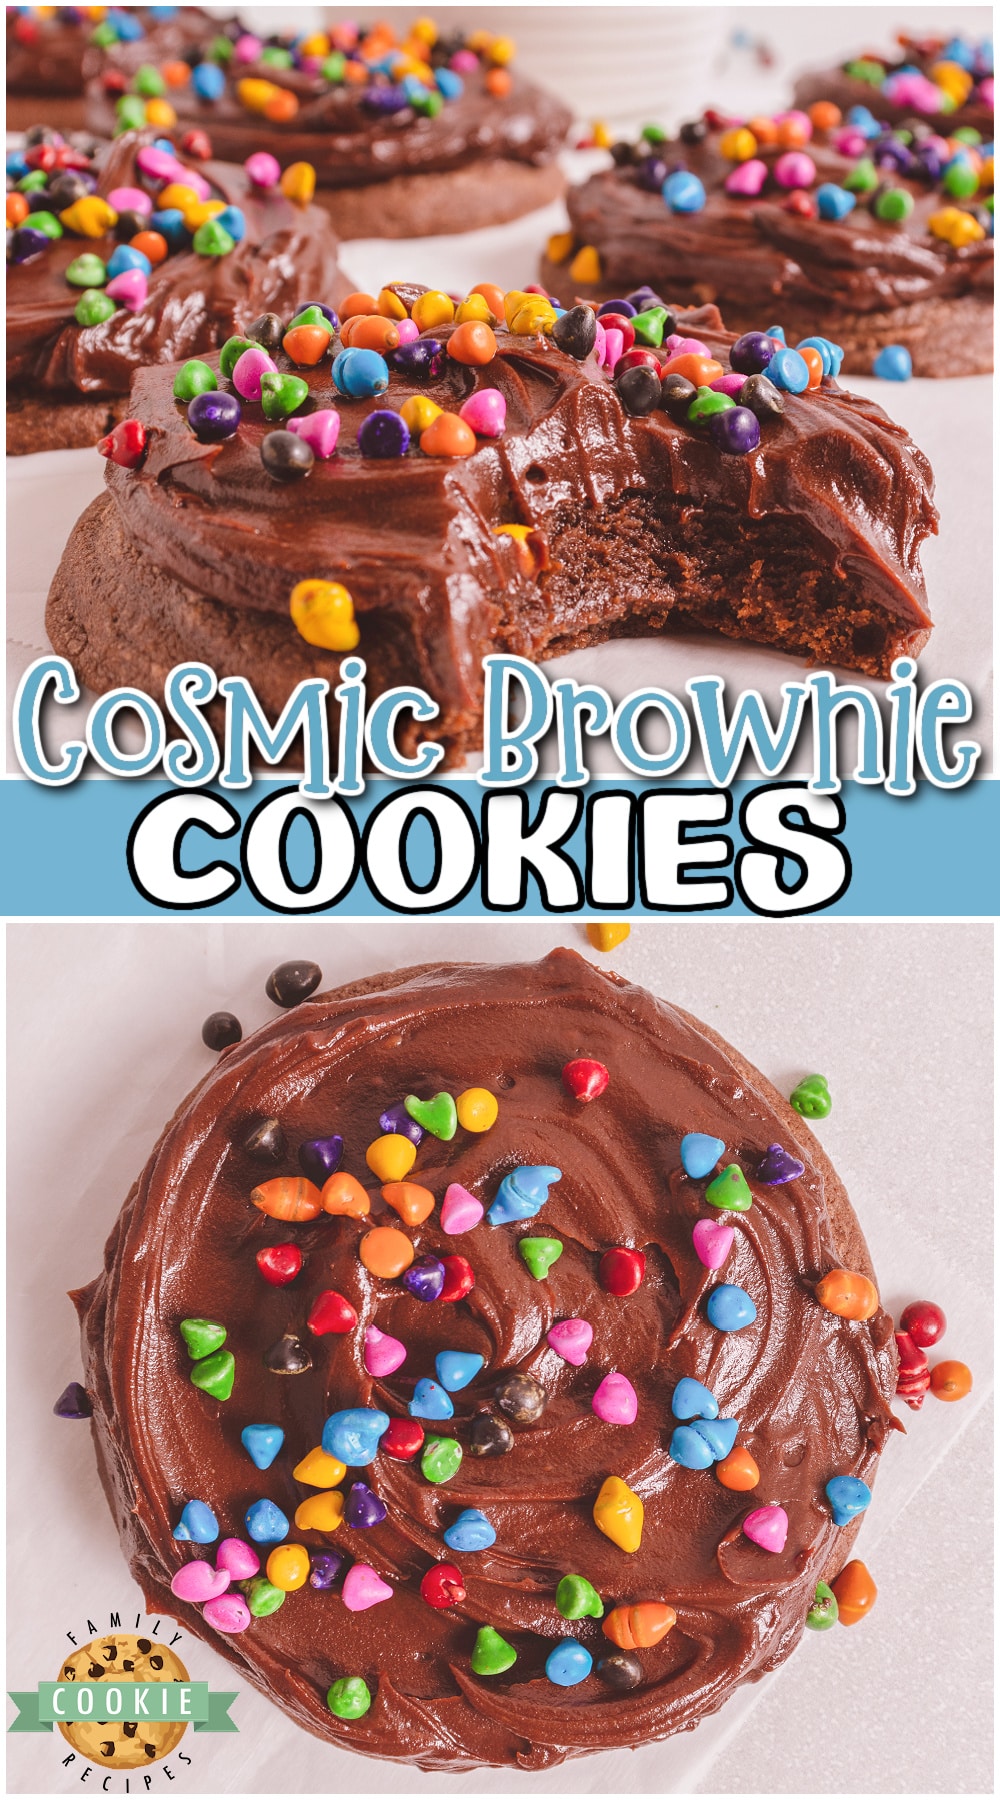 Cosmic Brownie Cookies are fudgy cookies covered in chocolate ganache & topped with fun rainbow sprinkles! Cookies perfect for Cosmic Brownie lovers!  via @buttergirls